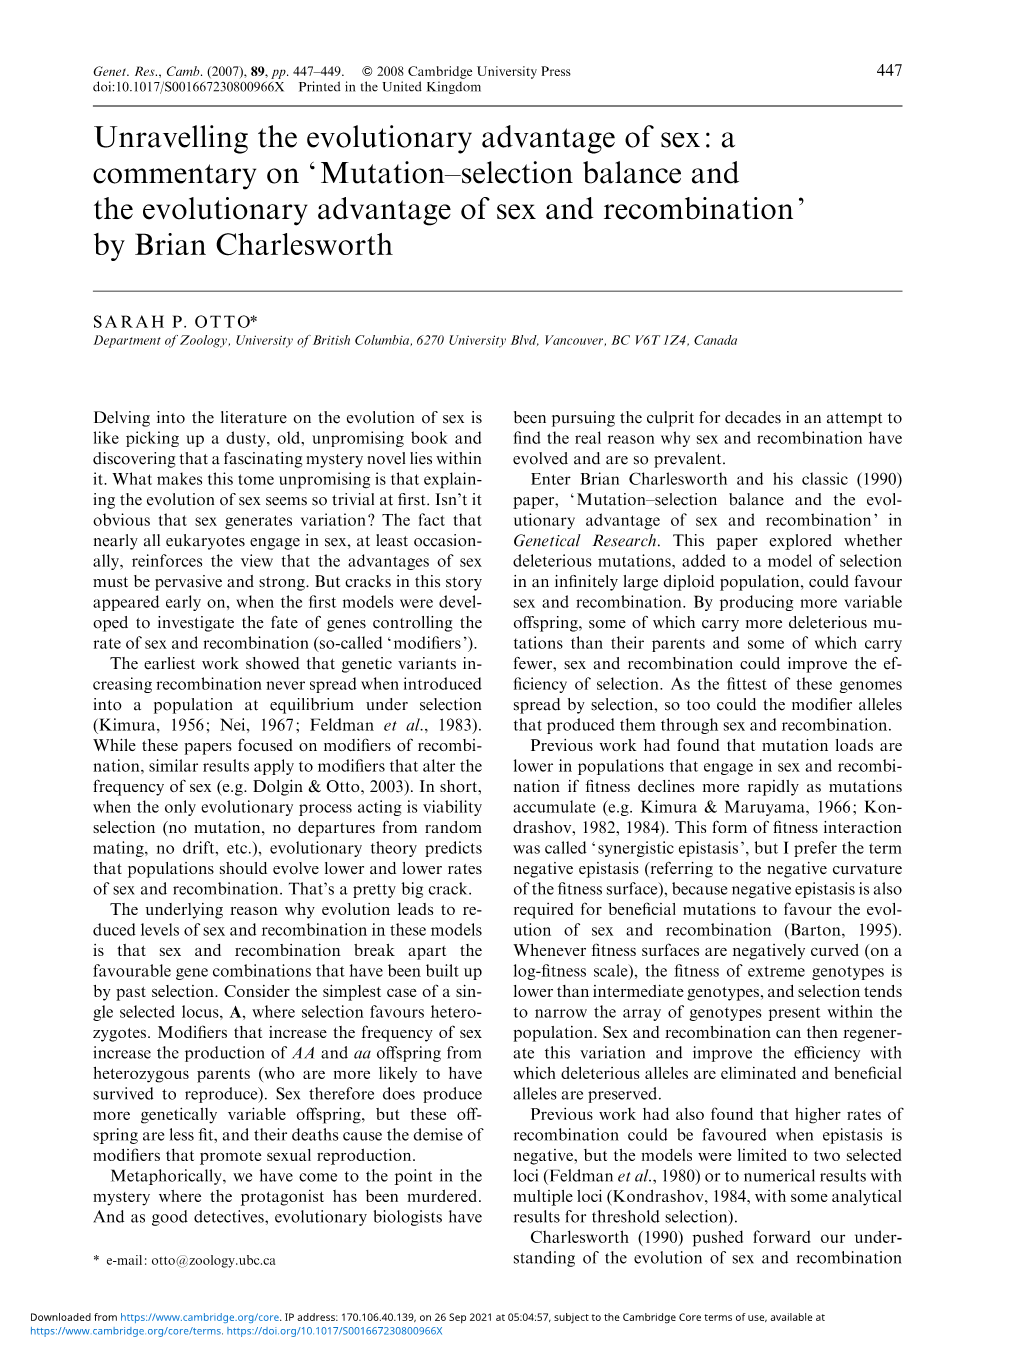 Mutation–Selection Balance and the Evolutionary Advantage of Sex and Recombination’ by Brian Charlesworth